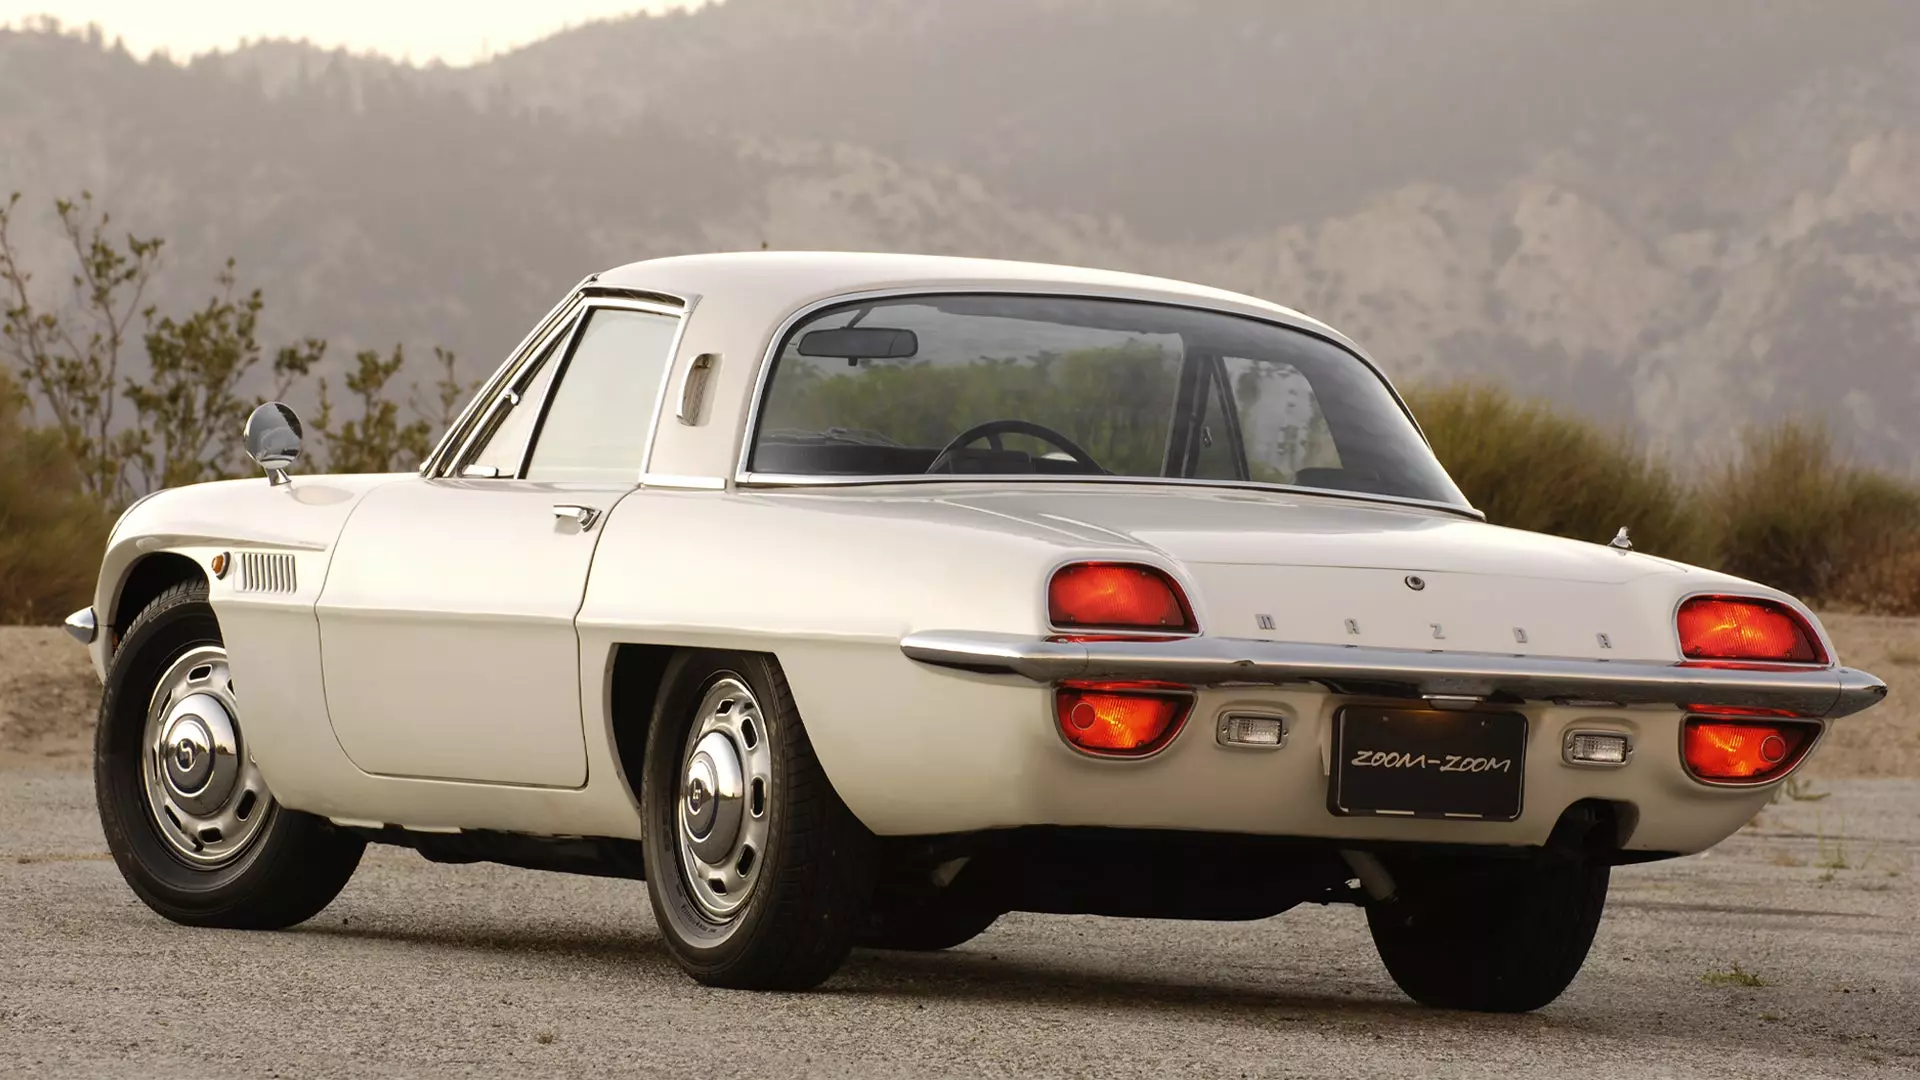 There Really Is No Bad Angle on the Original Mazda Cosmo Sport